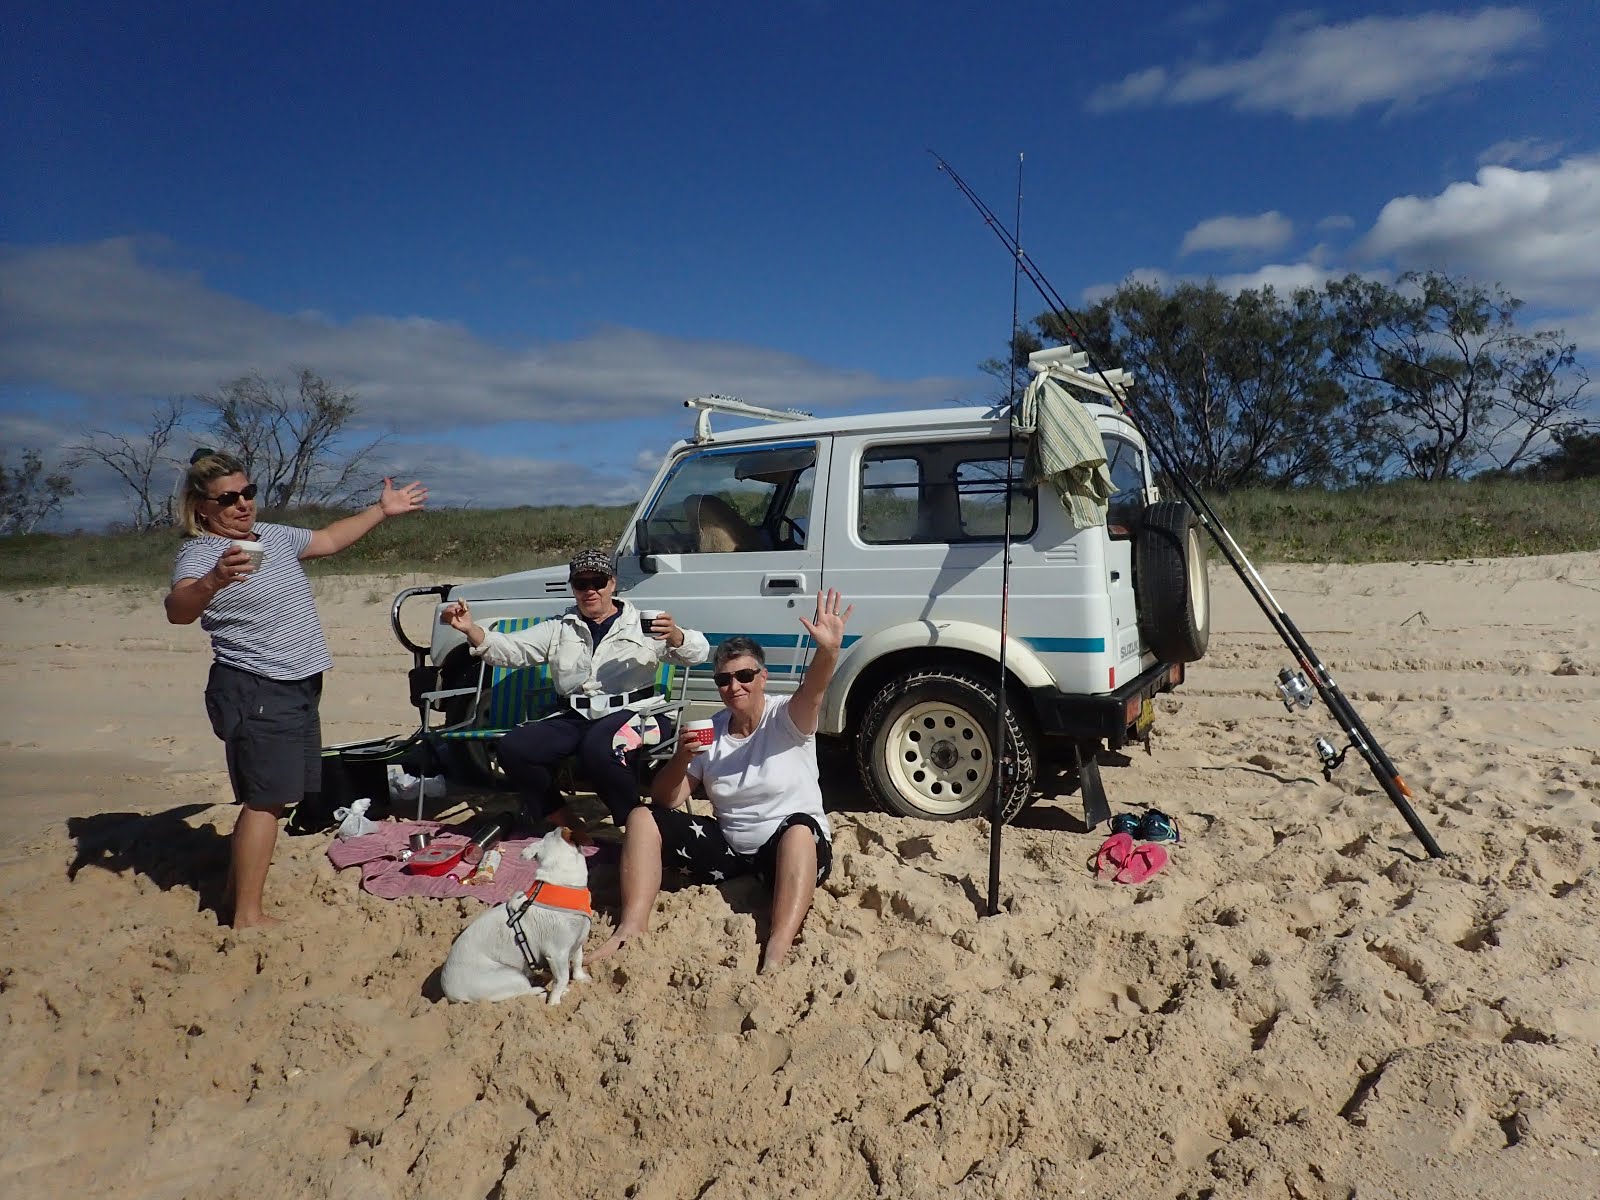 Fishing on the beach at Grassy Head